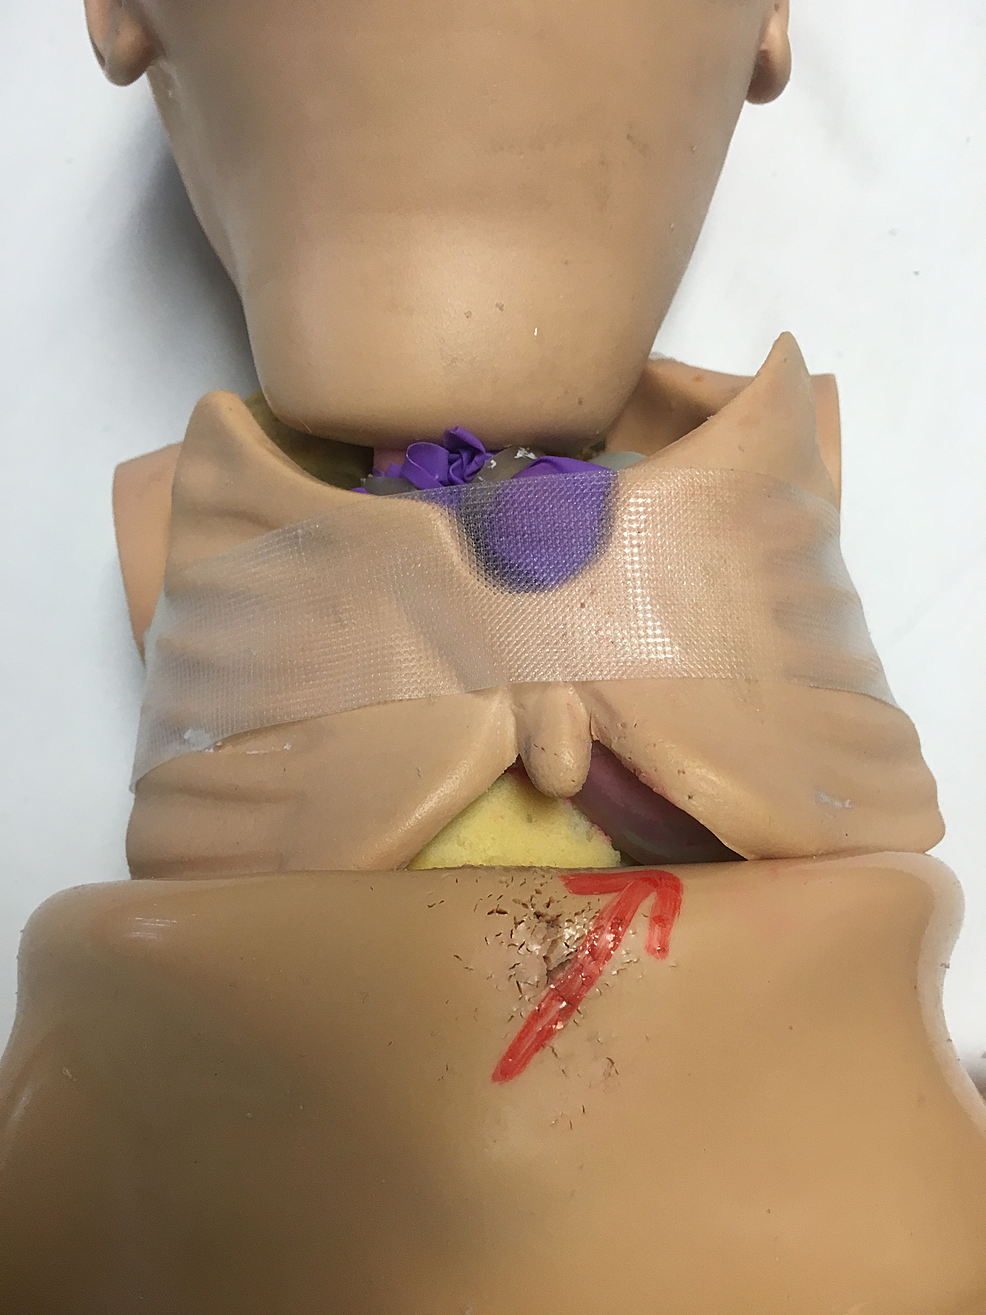 Simulation-manikin-with-plastic-pulled-back-to-reveal-chest-cavity